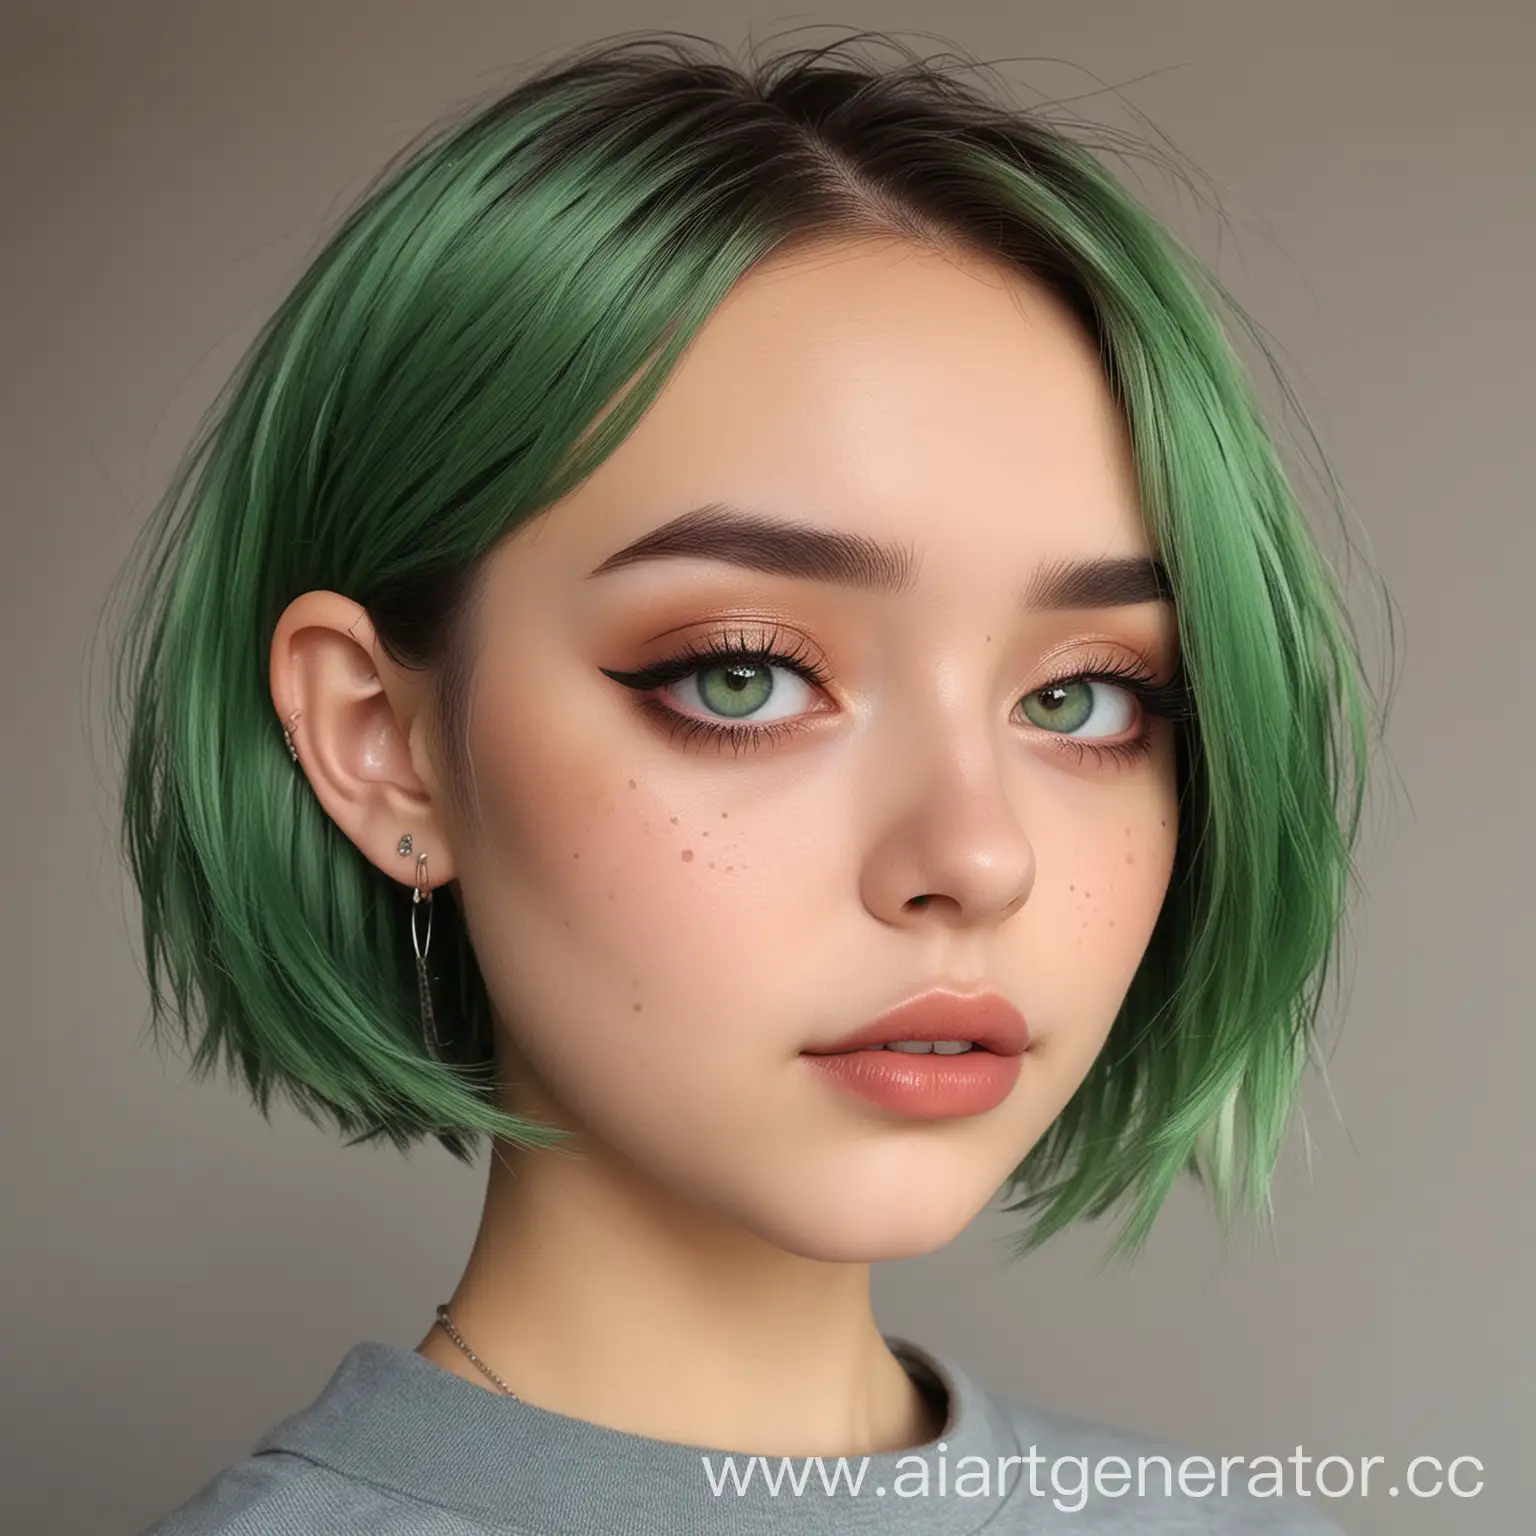 Anime-Style-Portrait-with-Bob-Haircut-Pierced-Ears-and-Vibrant-Green-Eyes